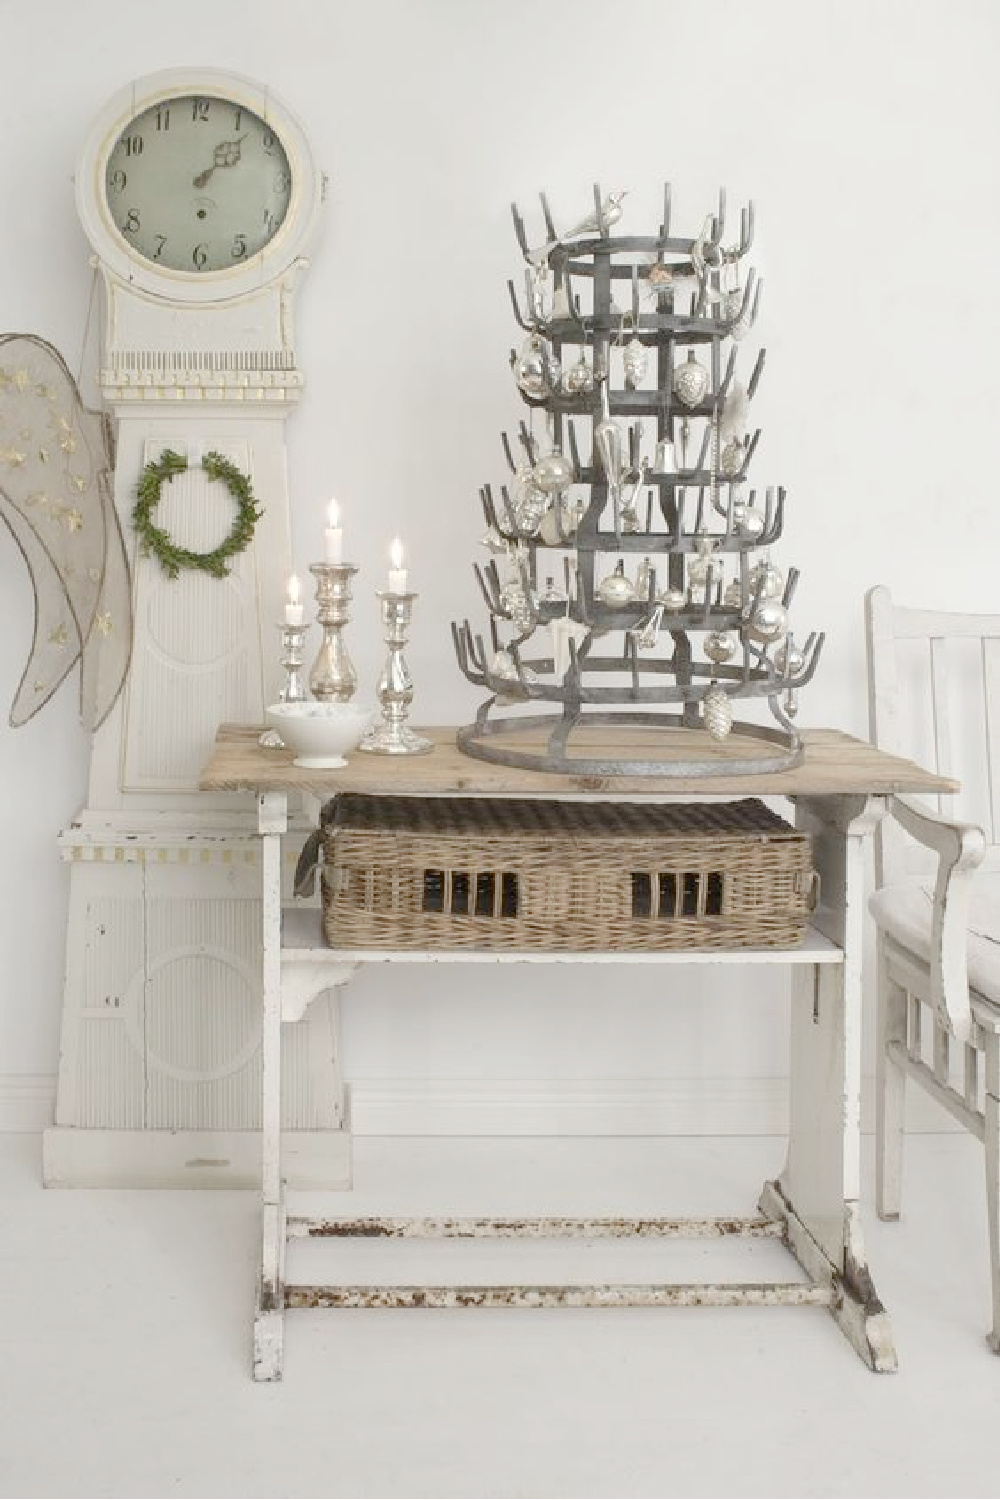 Swedish Christmas and Scandinavian holiday decor idea with vintage bottle rack as Christmas tree with sweet ornaments. The mora clock in foreground is a gorgeous touch! #swedishchristmas #bottlerack #christmasdecor